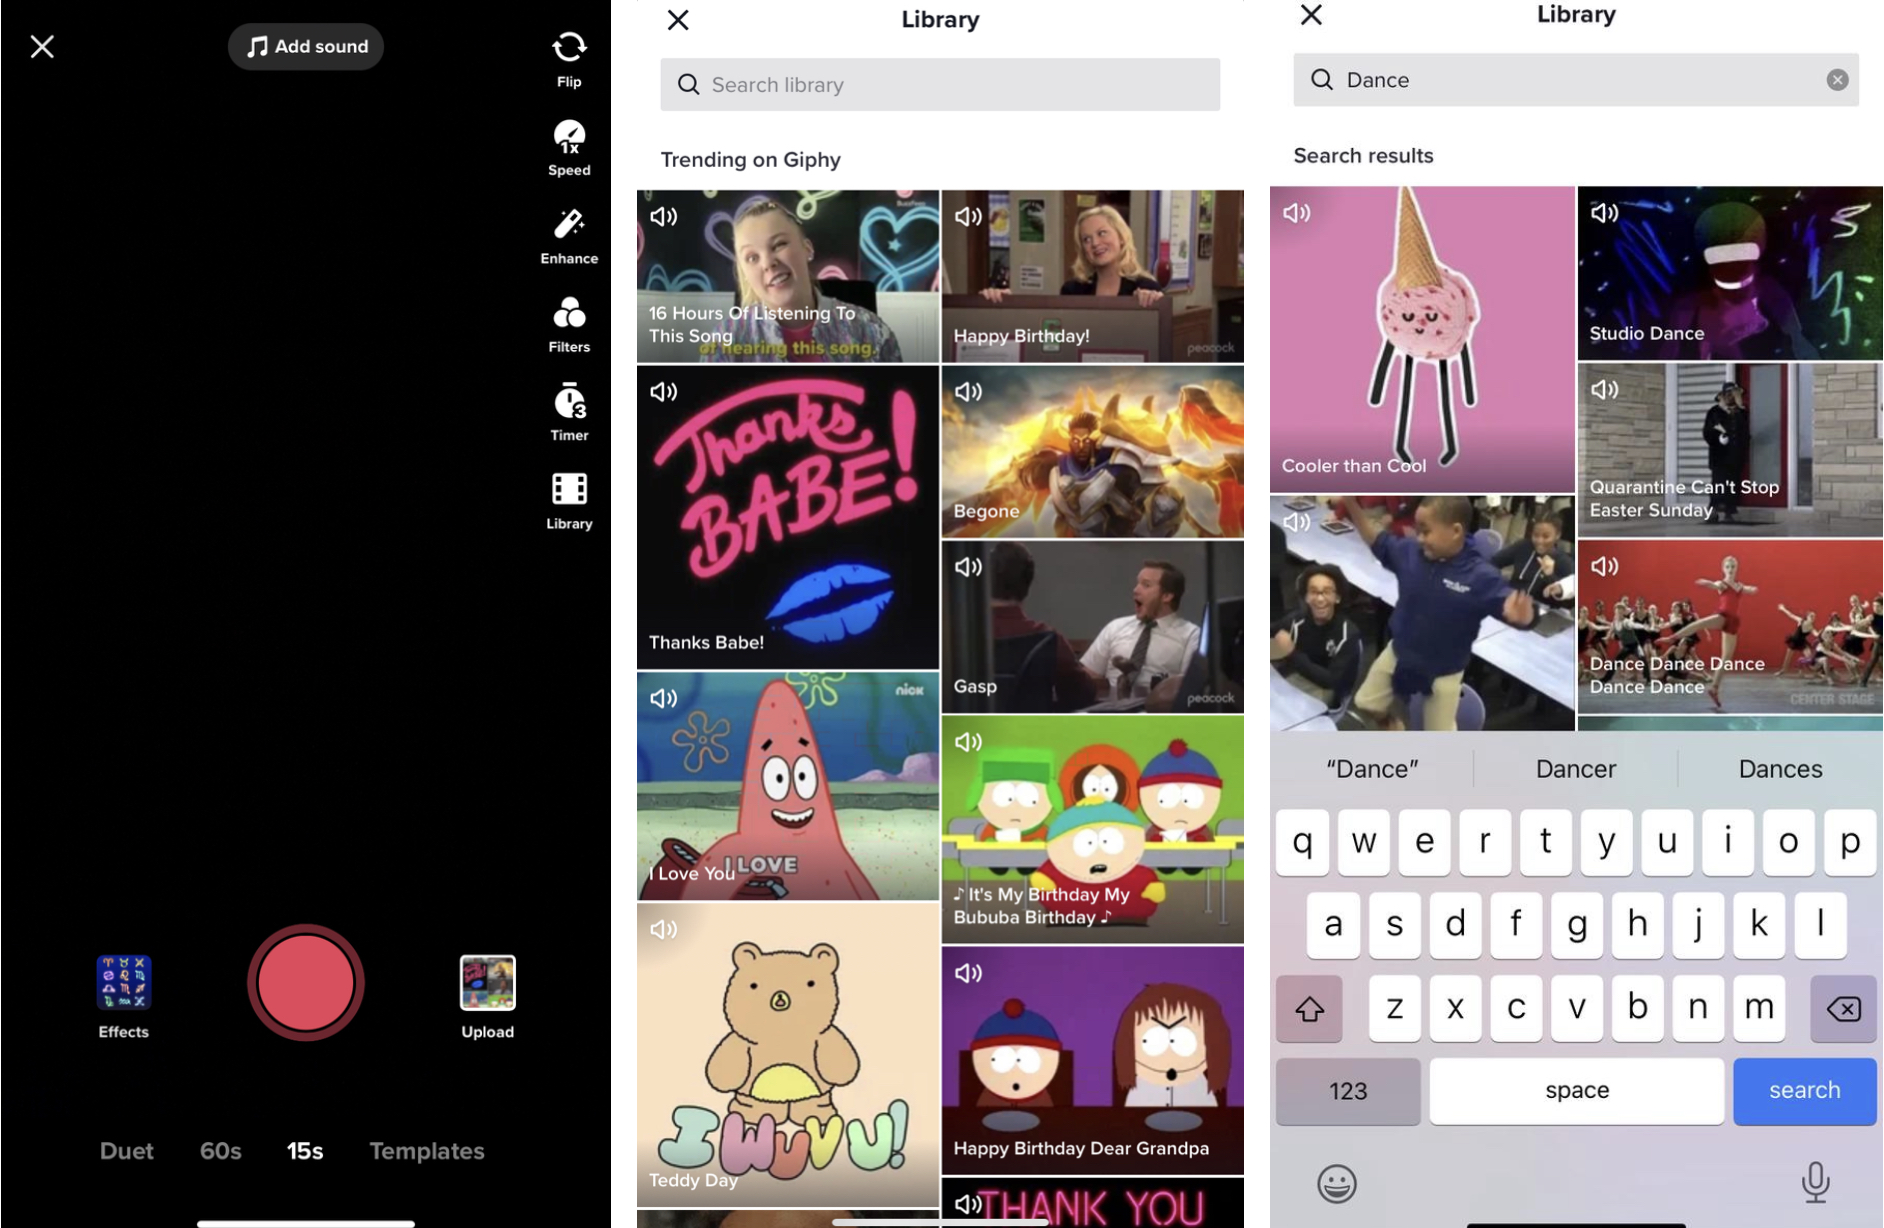 This Week in Apps: TikTok partners with Giphy, new rules for reader apps, Roblox sides with Apple